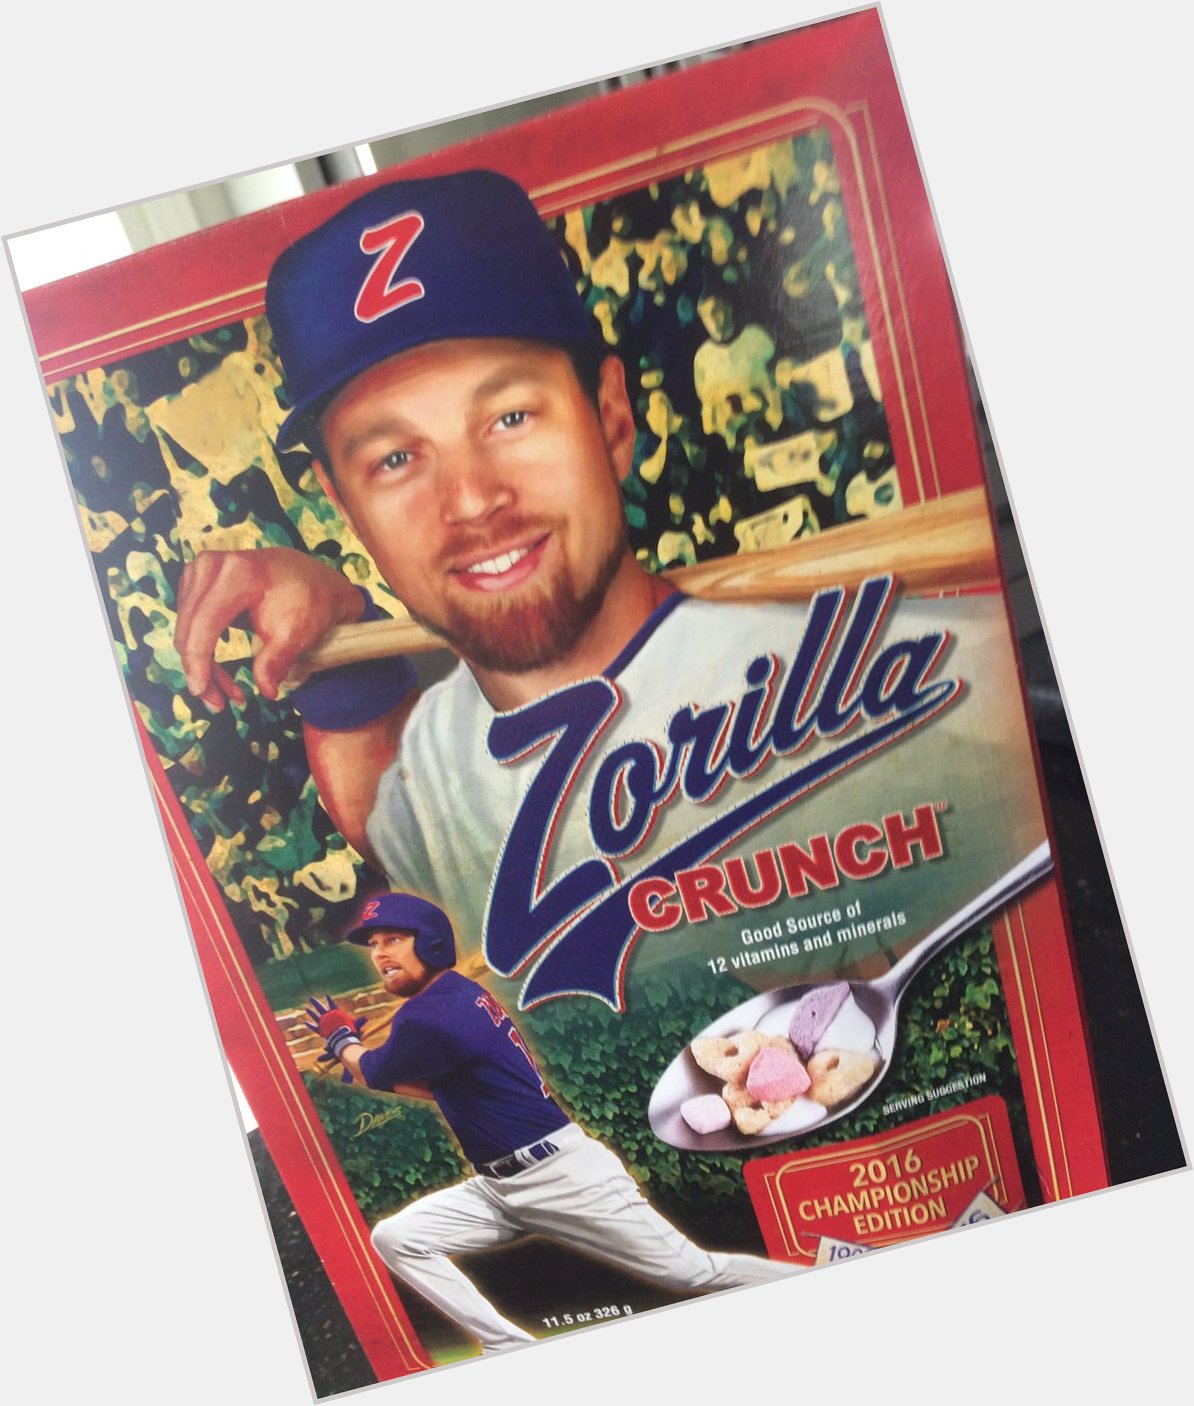 Happy 36th birthday Ben Zobrist!  The Zorilla Crunch cereal box looks a lot like your Eureka High senior photo!! 